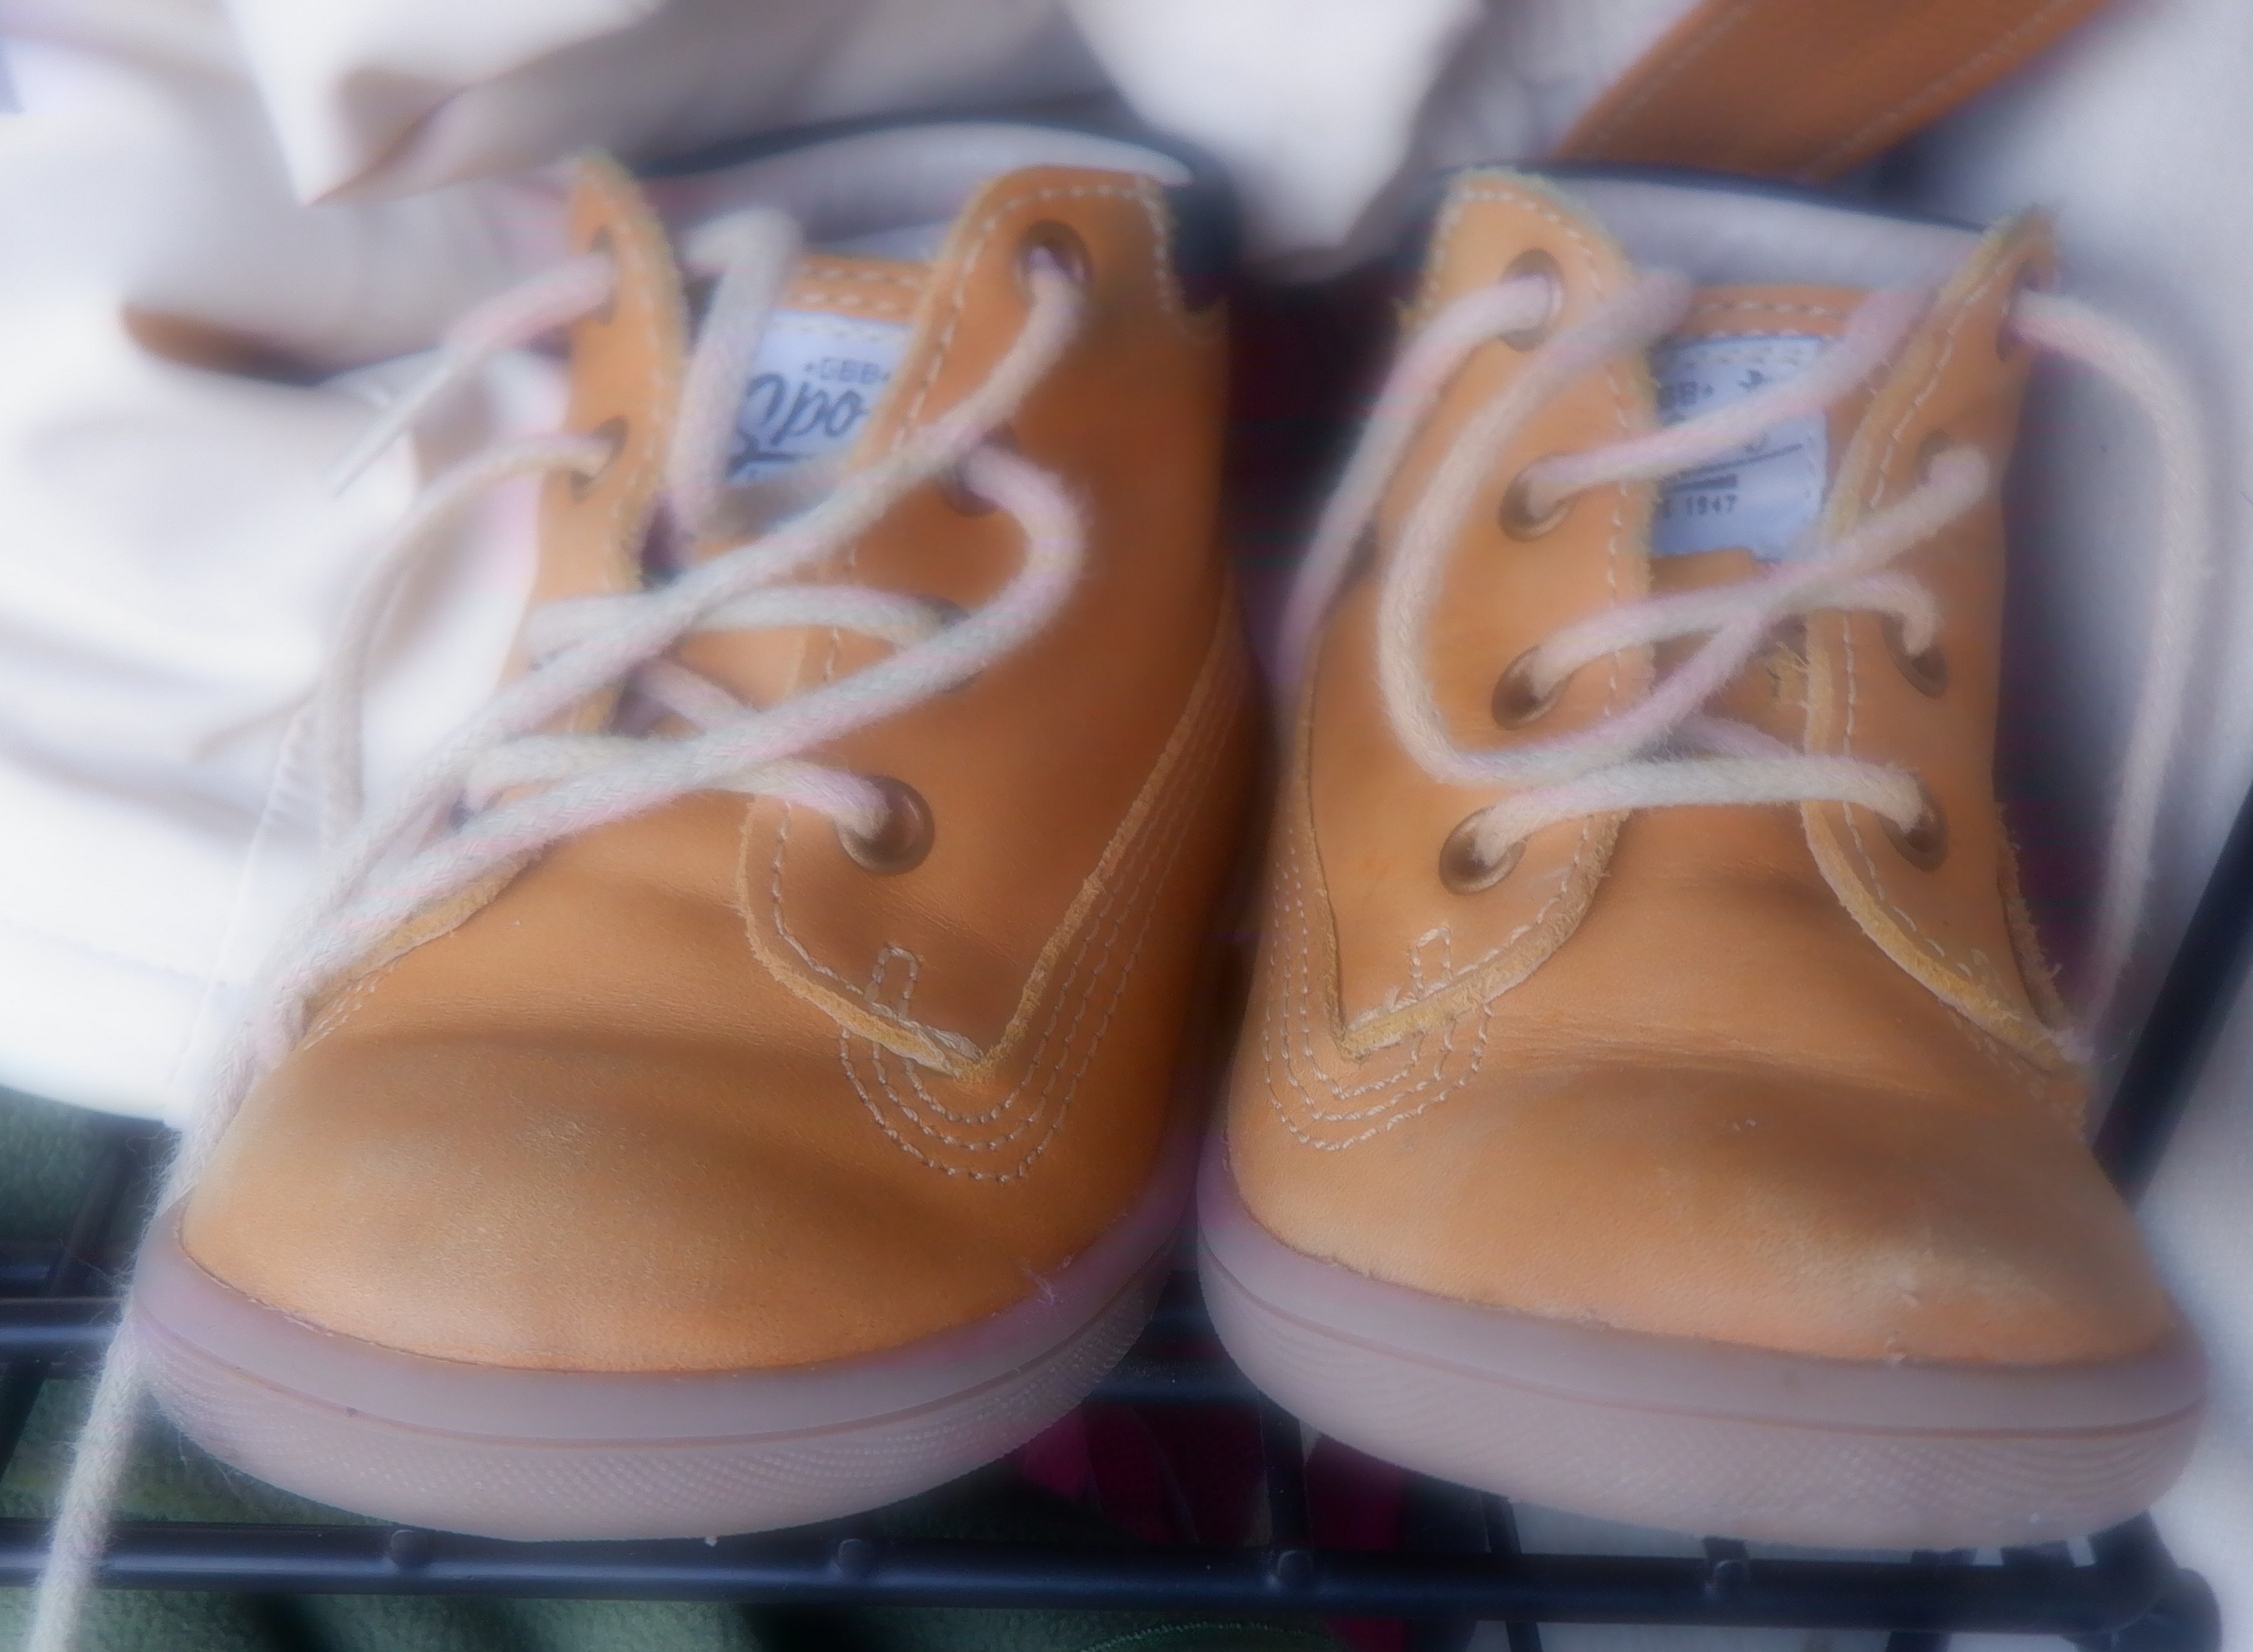 Photo taken by me of kid&#039;s shoes 1-19-23